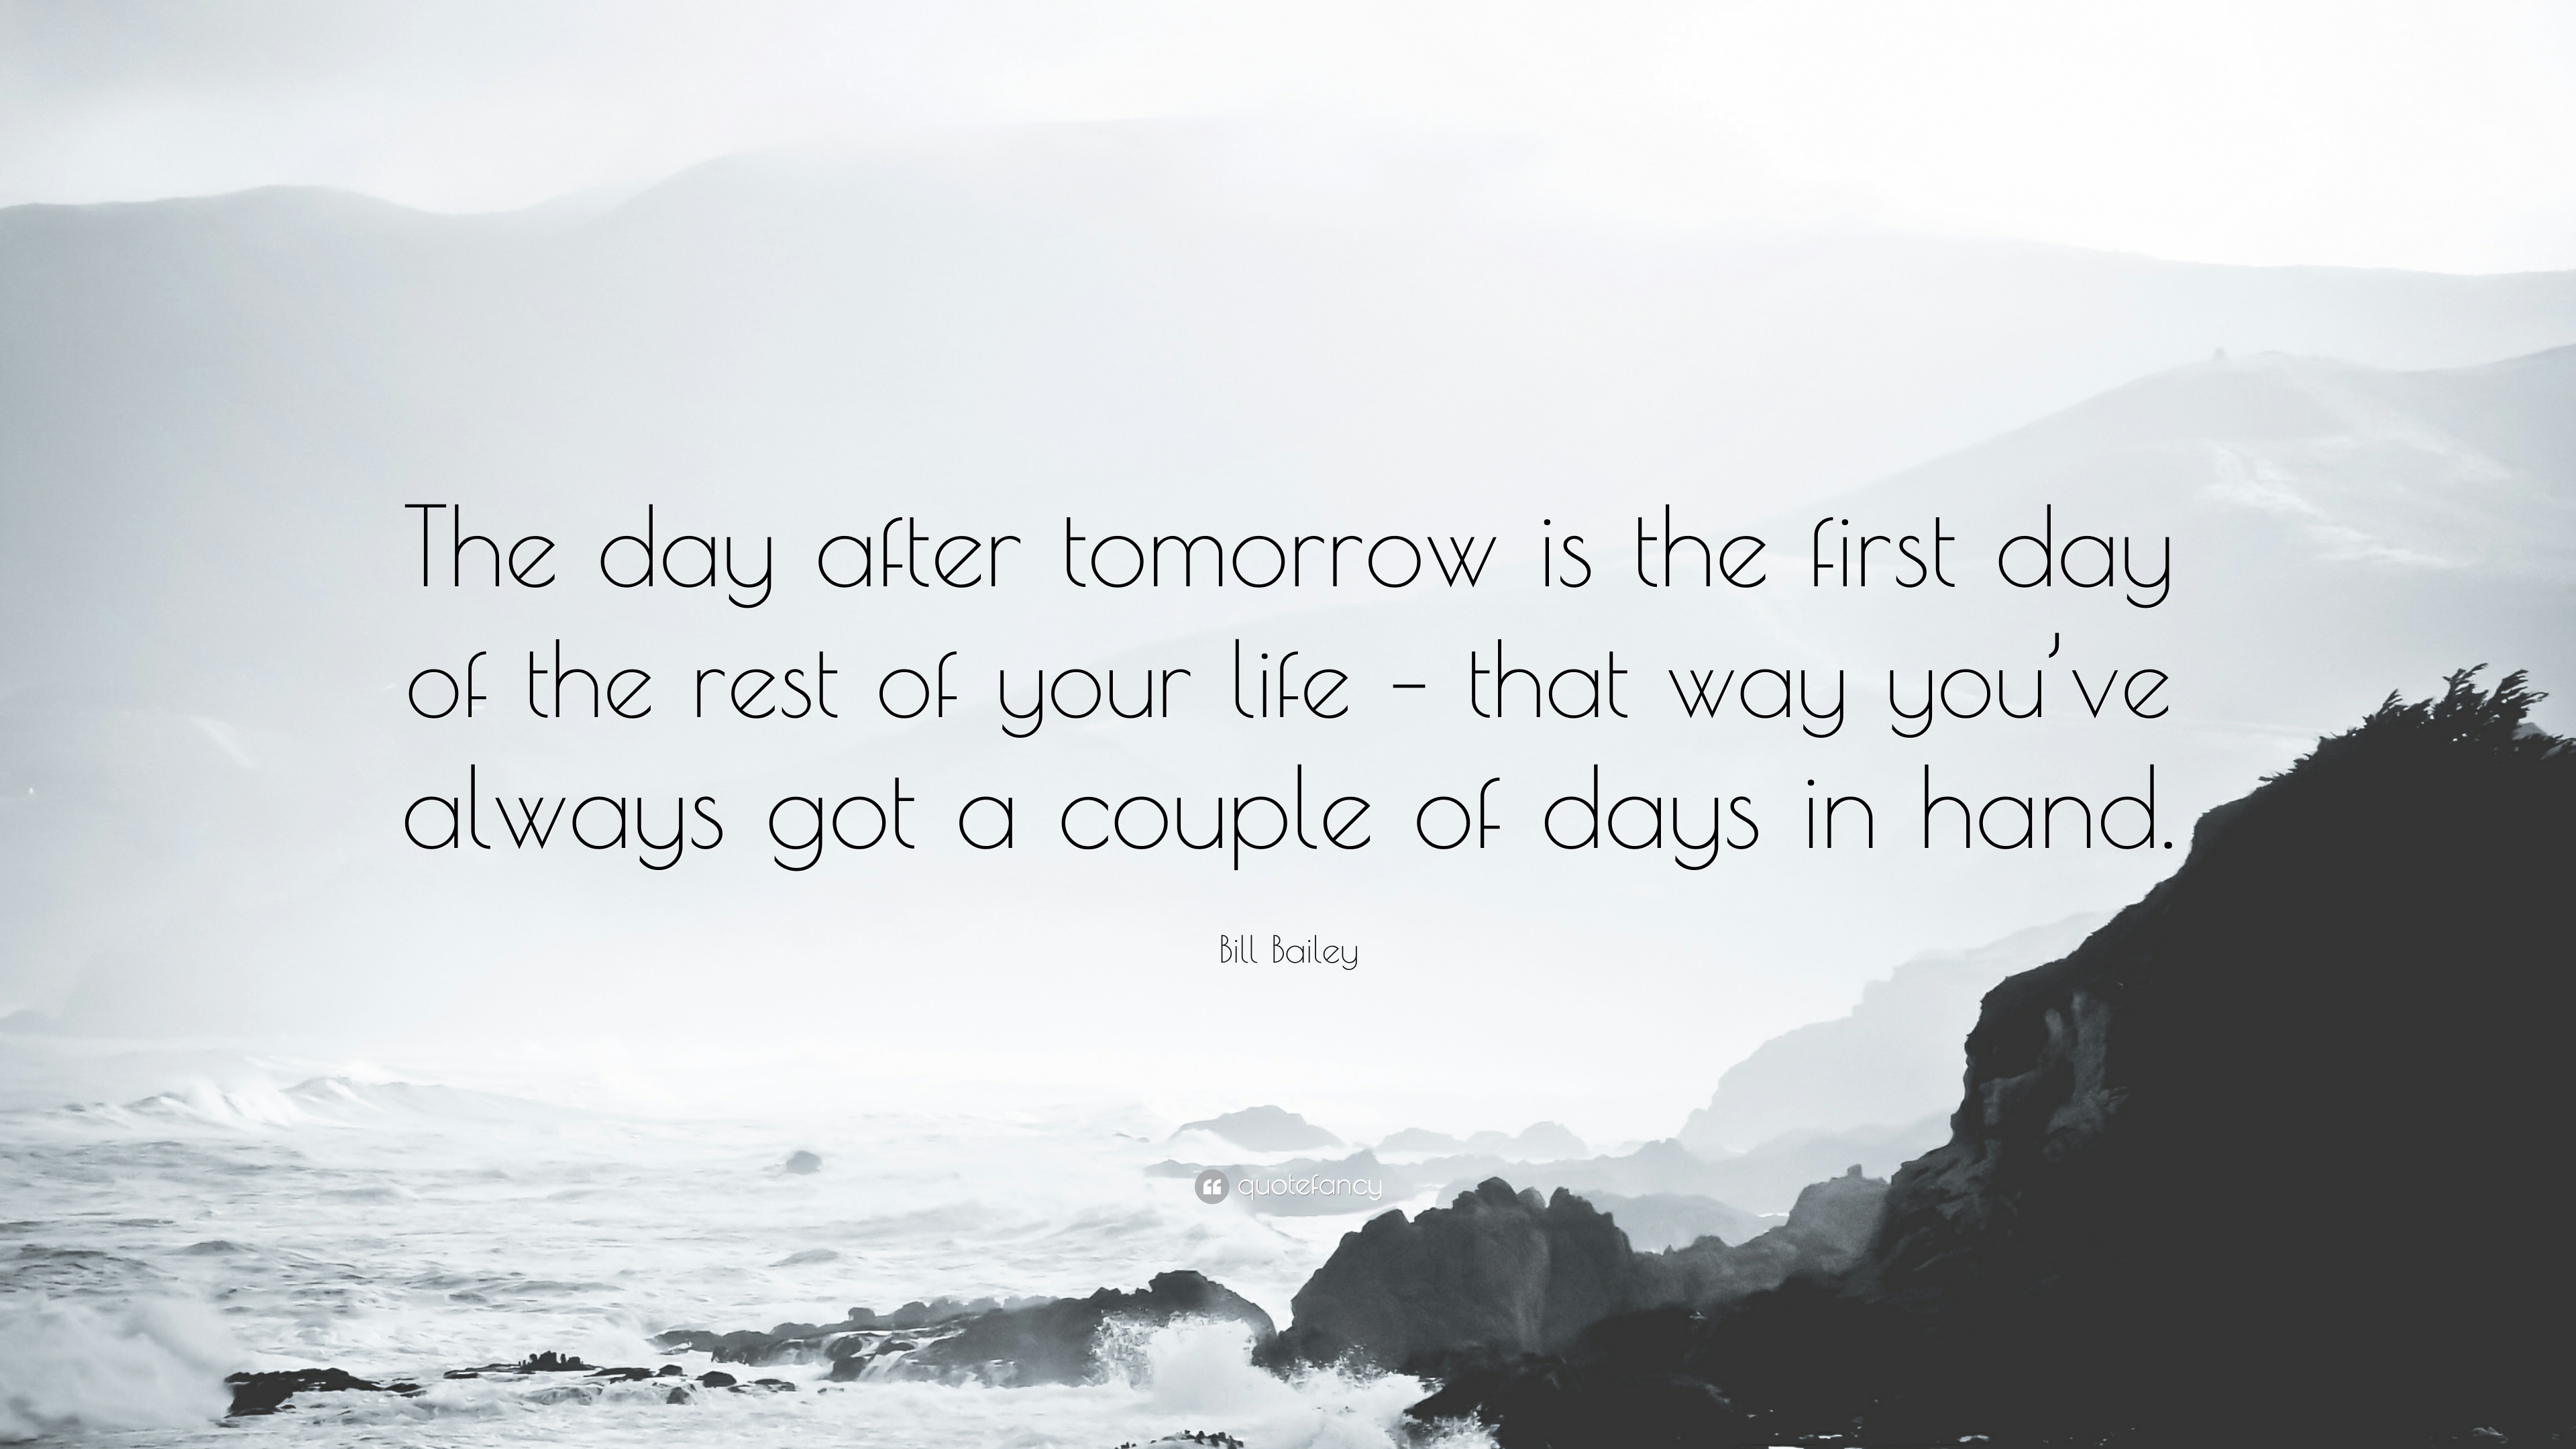 Bill Bailey Quote: “The day after tomorrow is the first day of the rest of your